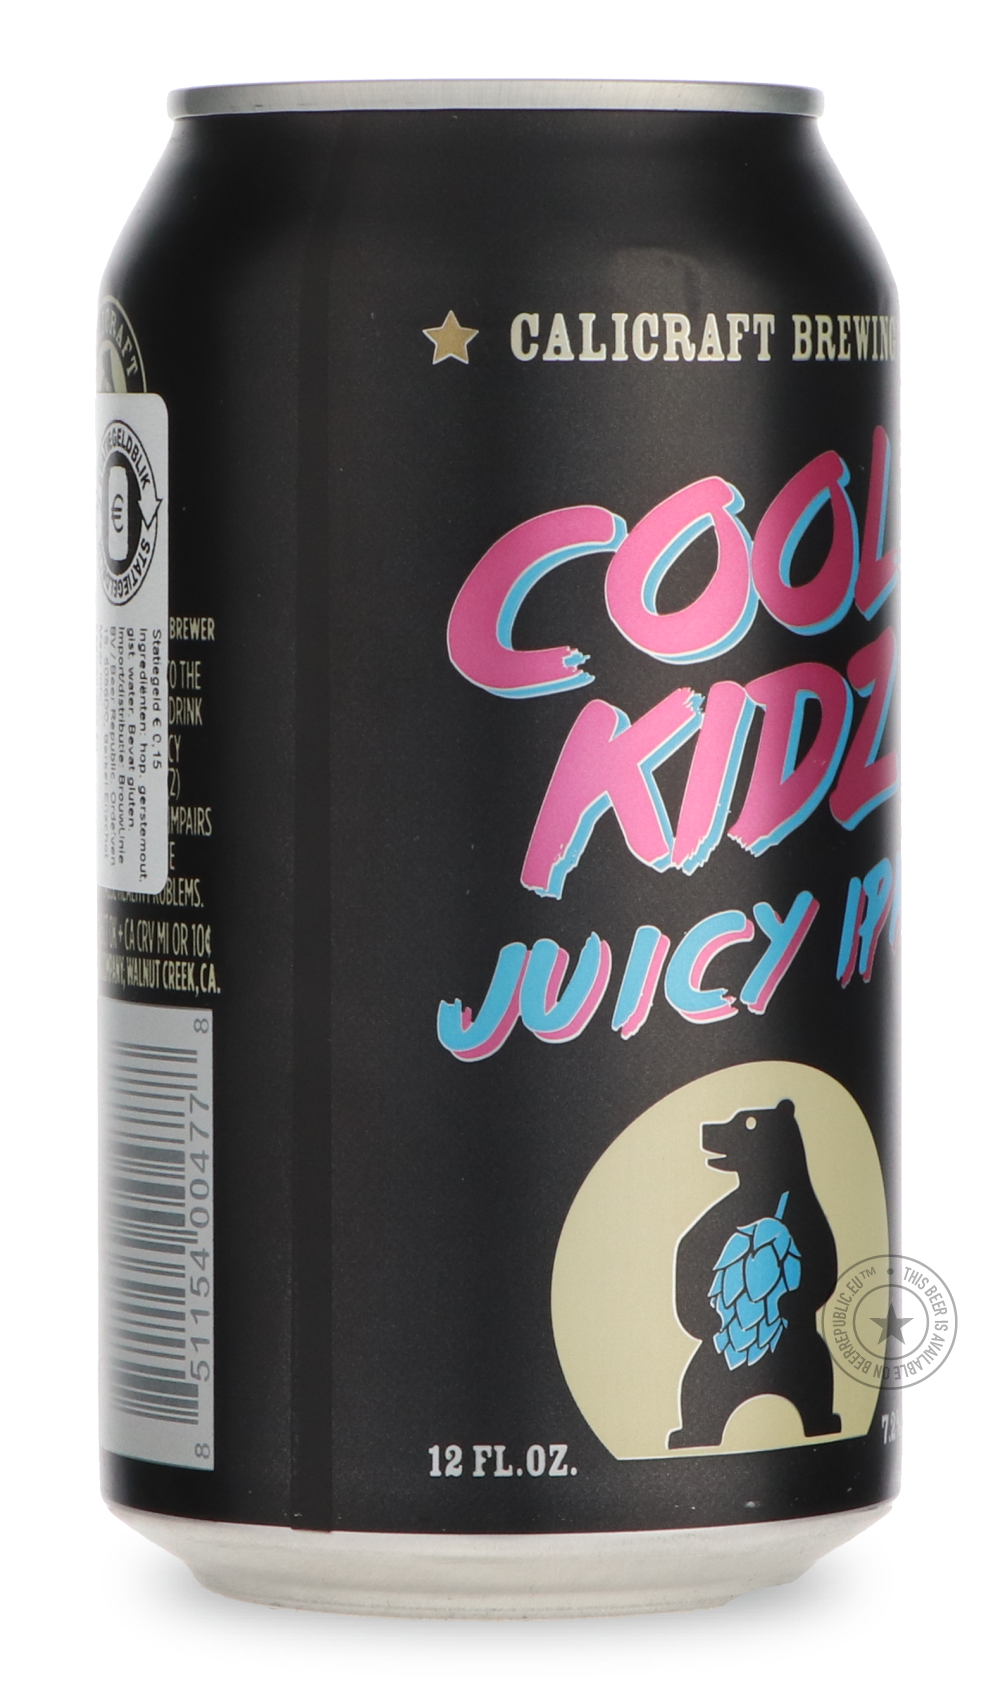 -Calicraft- Cool Kidz Juicy-IPA- Only @ Beer Republic - The best online beer store for American & Canadian craft beer - Buy beer online from the USA and Canada - Bier online kopen - Amerikaans bier kopen - Craft beer store - Craft beer kopen - Amerikanisch bier kaufen - Bier online kaufen - Acheter biere online - IPA - Stout - Porter - New England IPA - Hazy IPA - Imperial Stout - Barrel Aged - Barrel Aged Imperial Stout - Brown - Dark beer - Blond - Blonde - Pilsner - Lager - Wheat - Weizen - Amber - Barle